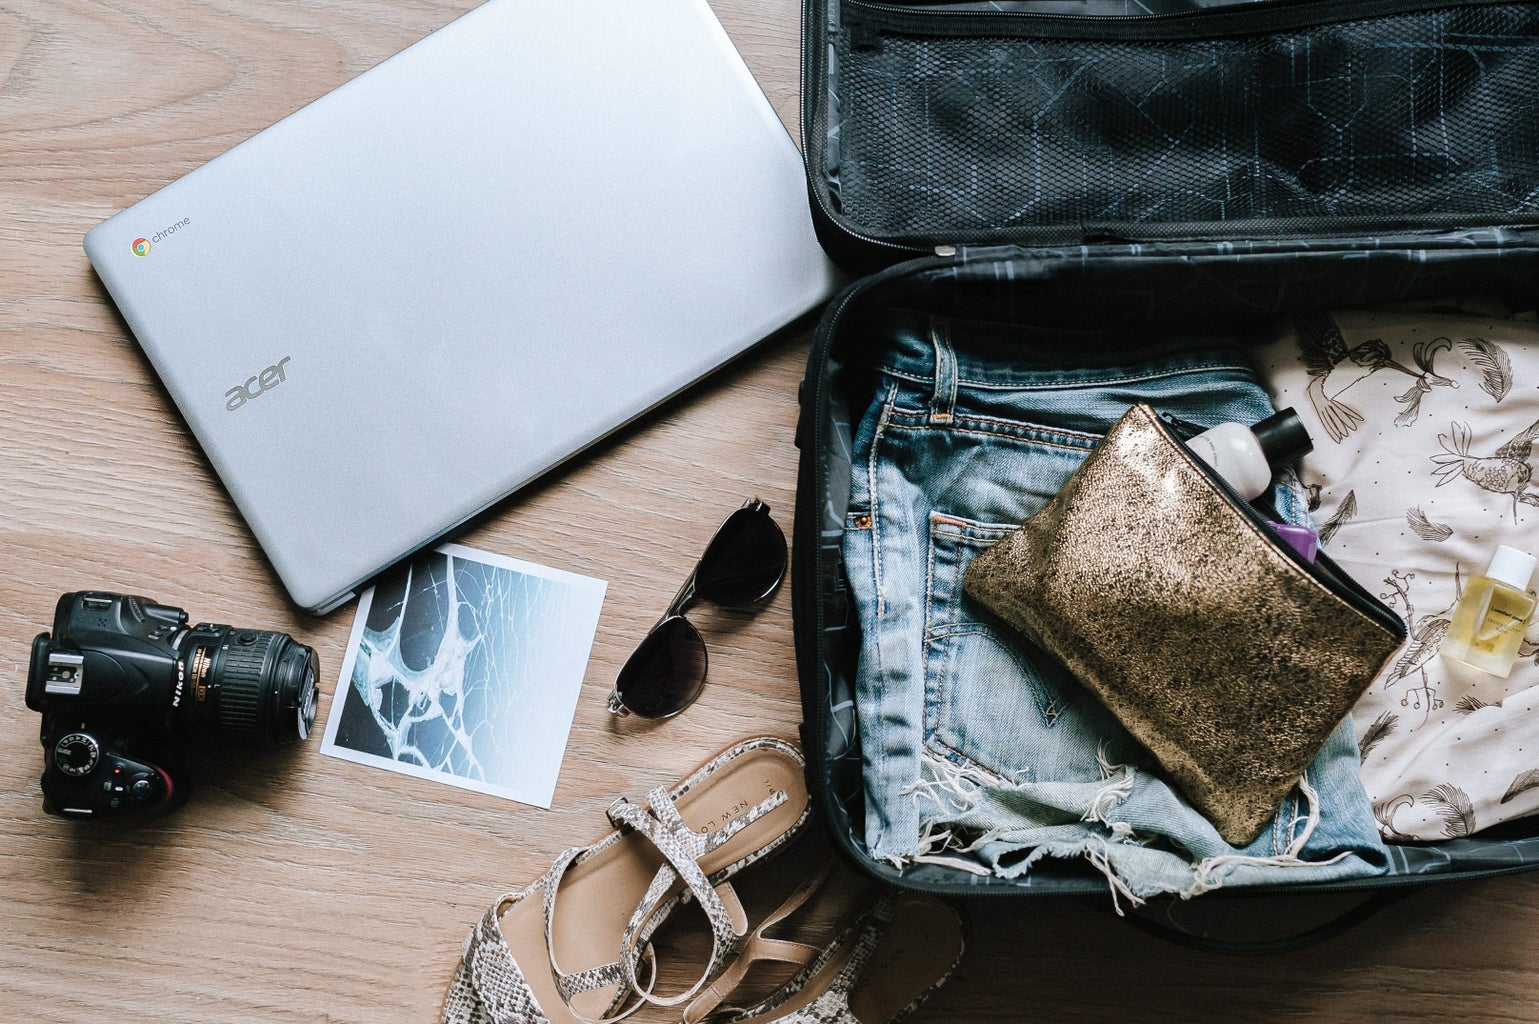 open suitcase with a laptop, camera, a photo, and sunglasses lying around it